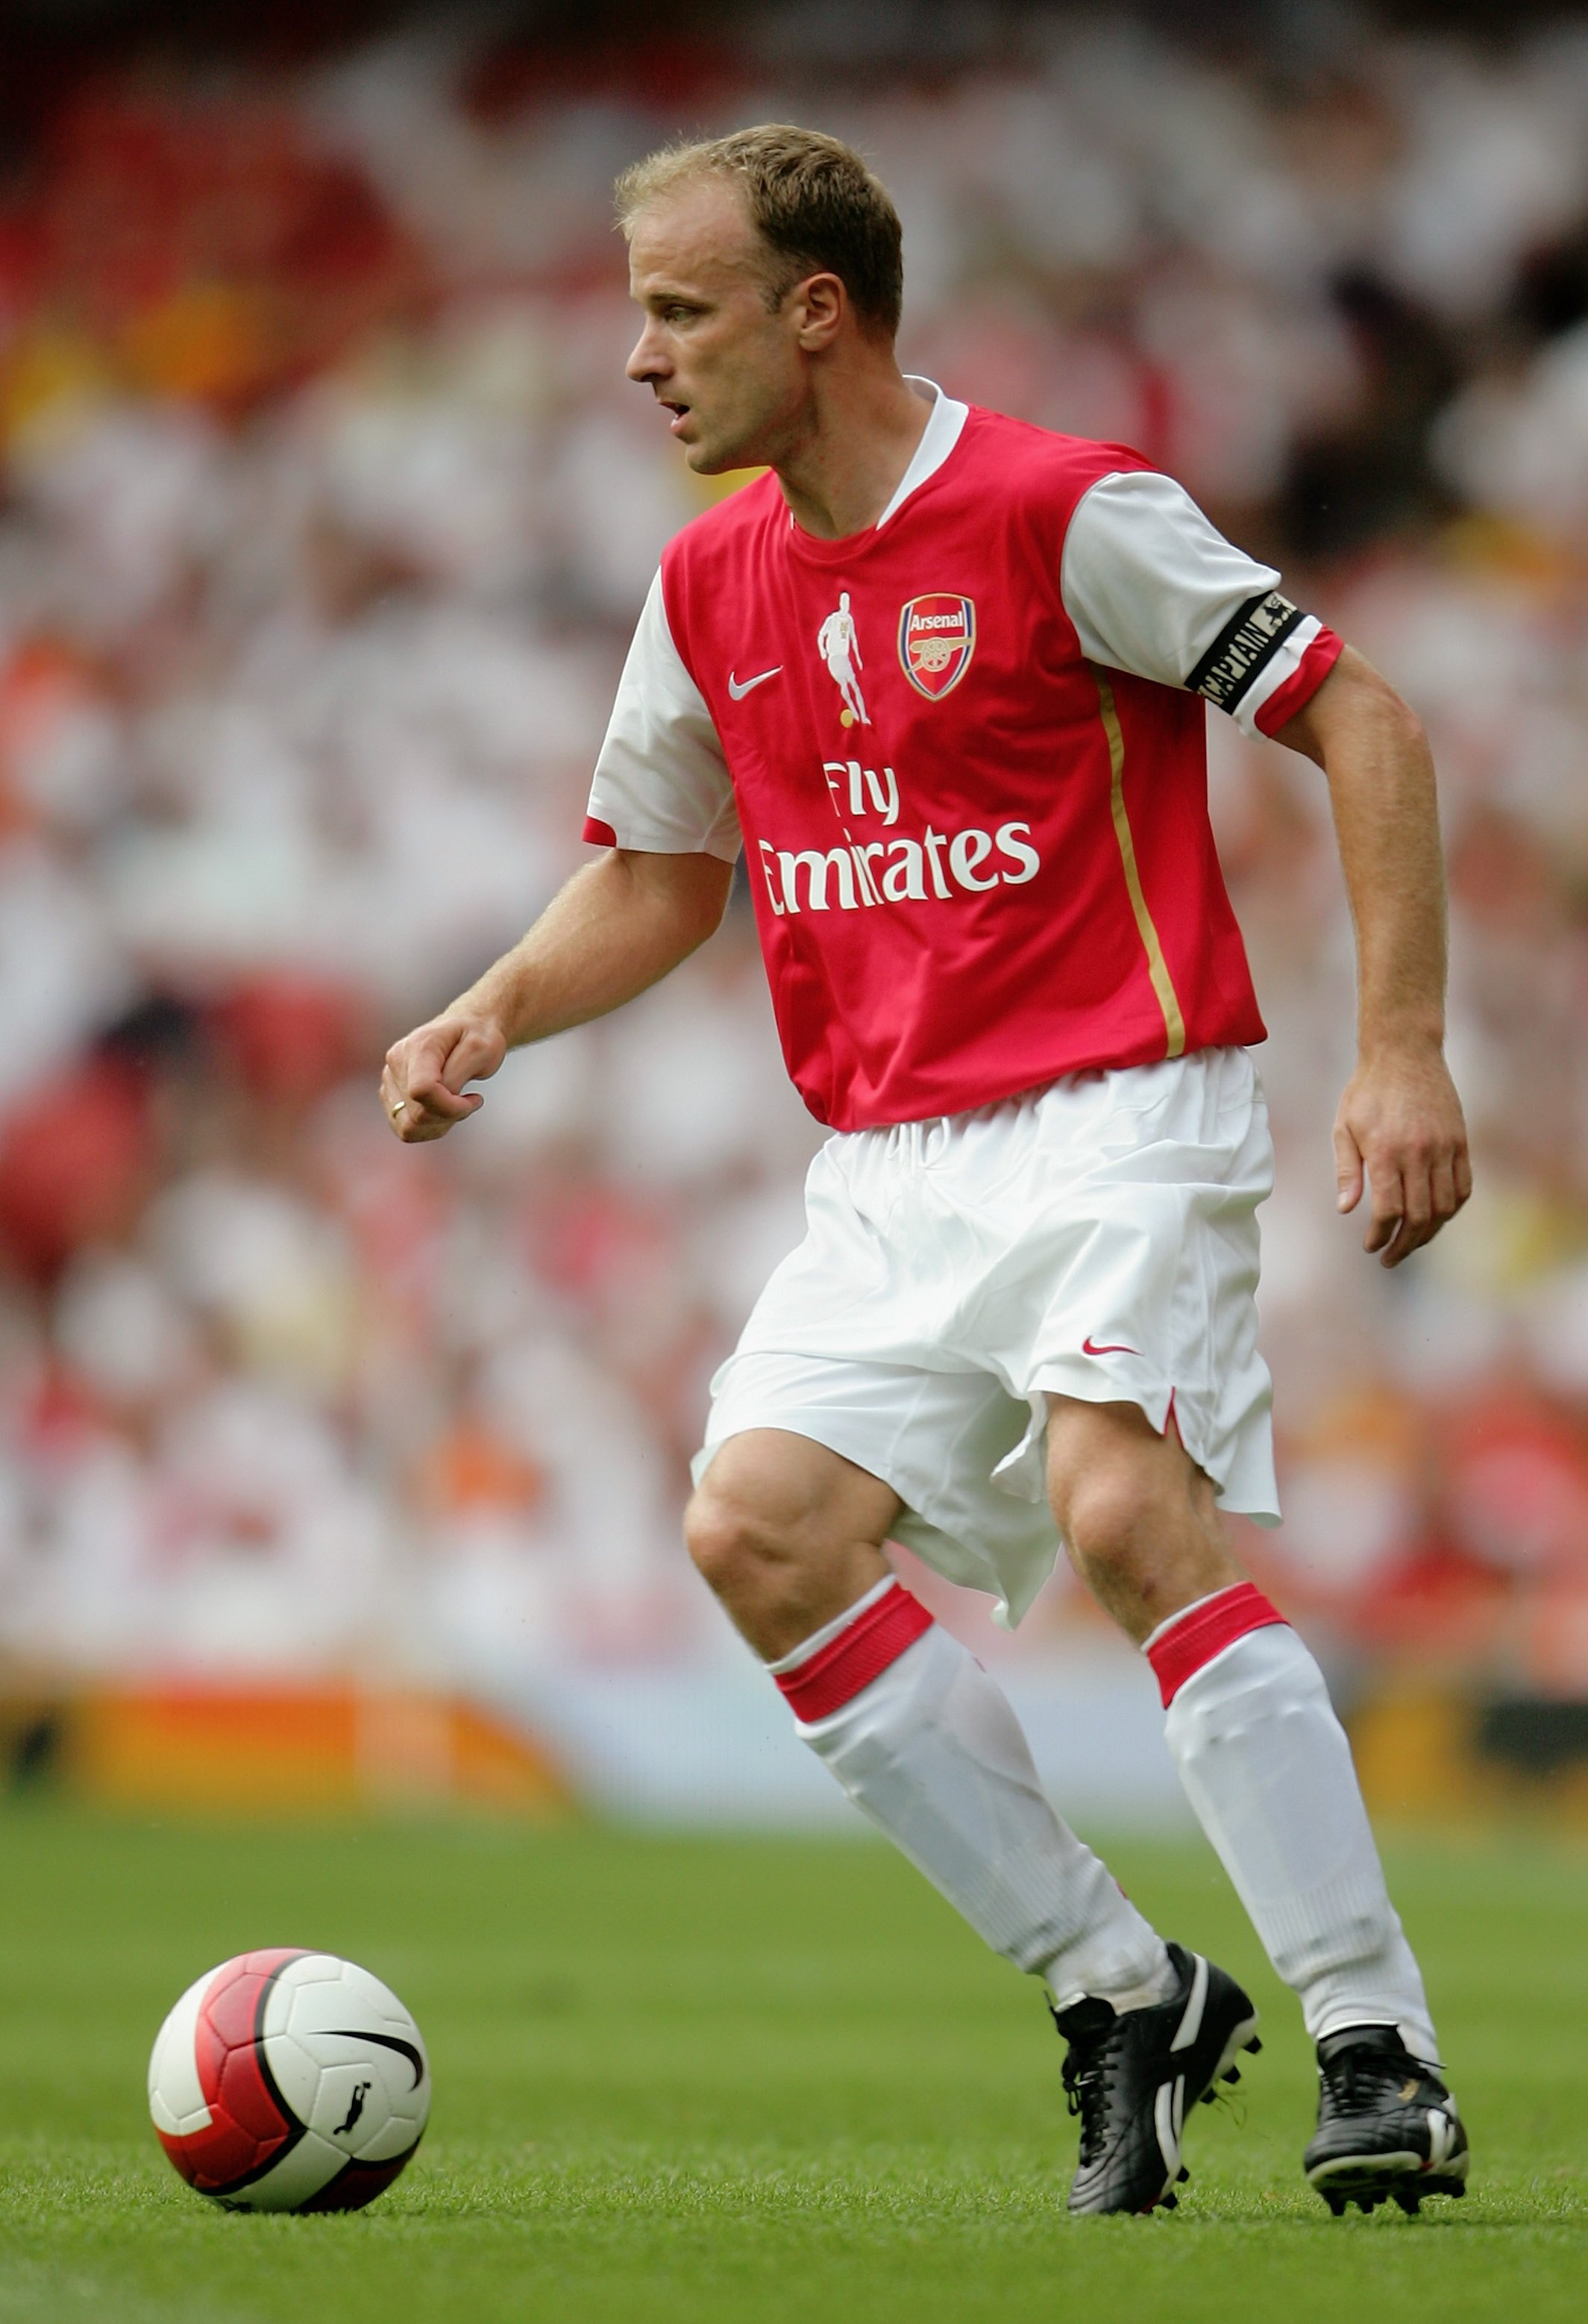 LONDON - JULY 22:  Dennis Bergkamp of Arsenal runs with the ball during the Dennis Bergkamp testimonial match between Arsenal and Ajax at the Emirates Stadium on July 22, 2006 in London, England.  (Photo by Jamie McDonald/Getty Images)